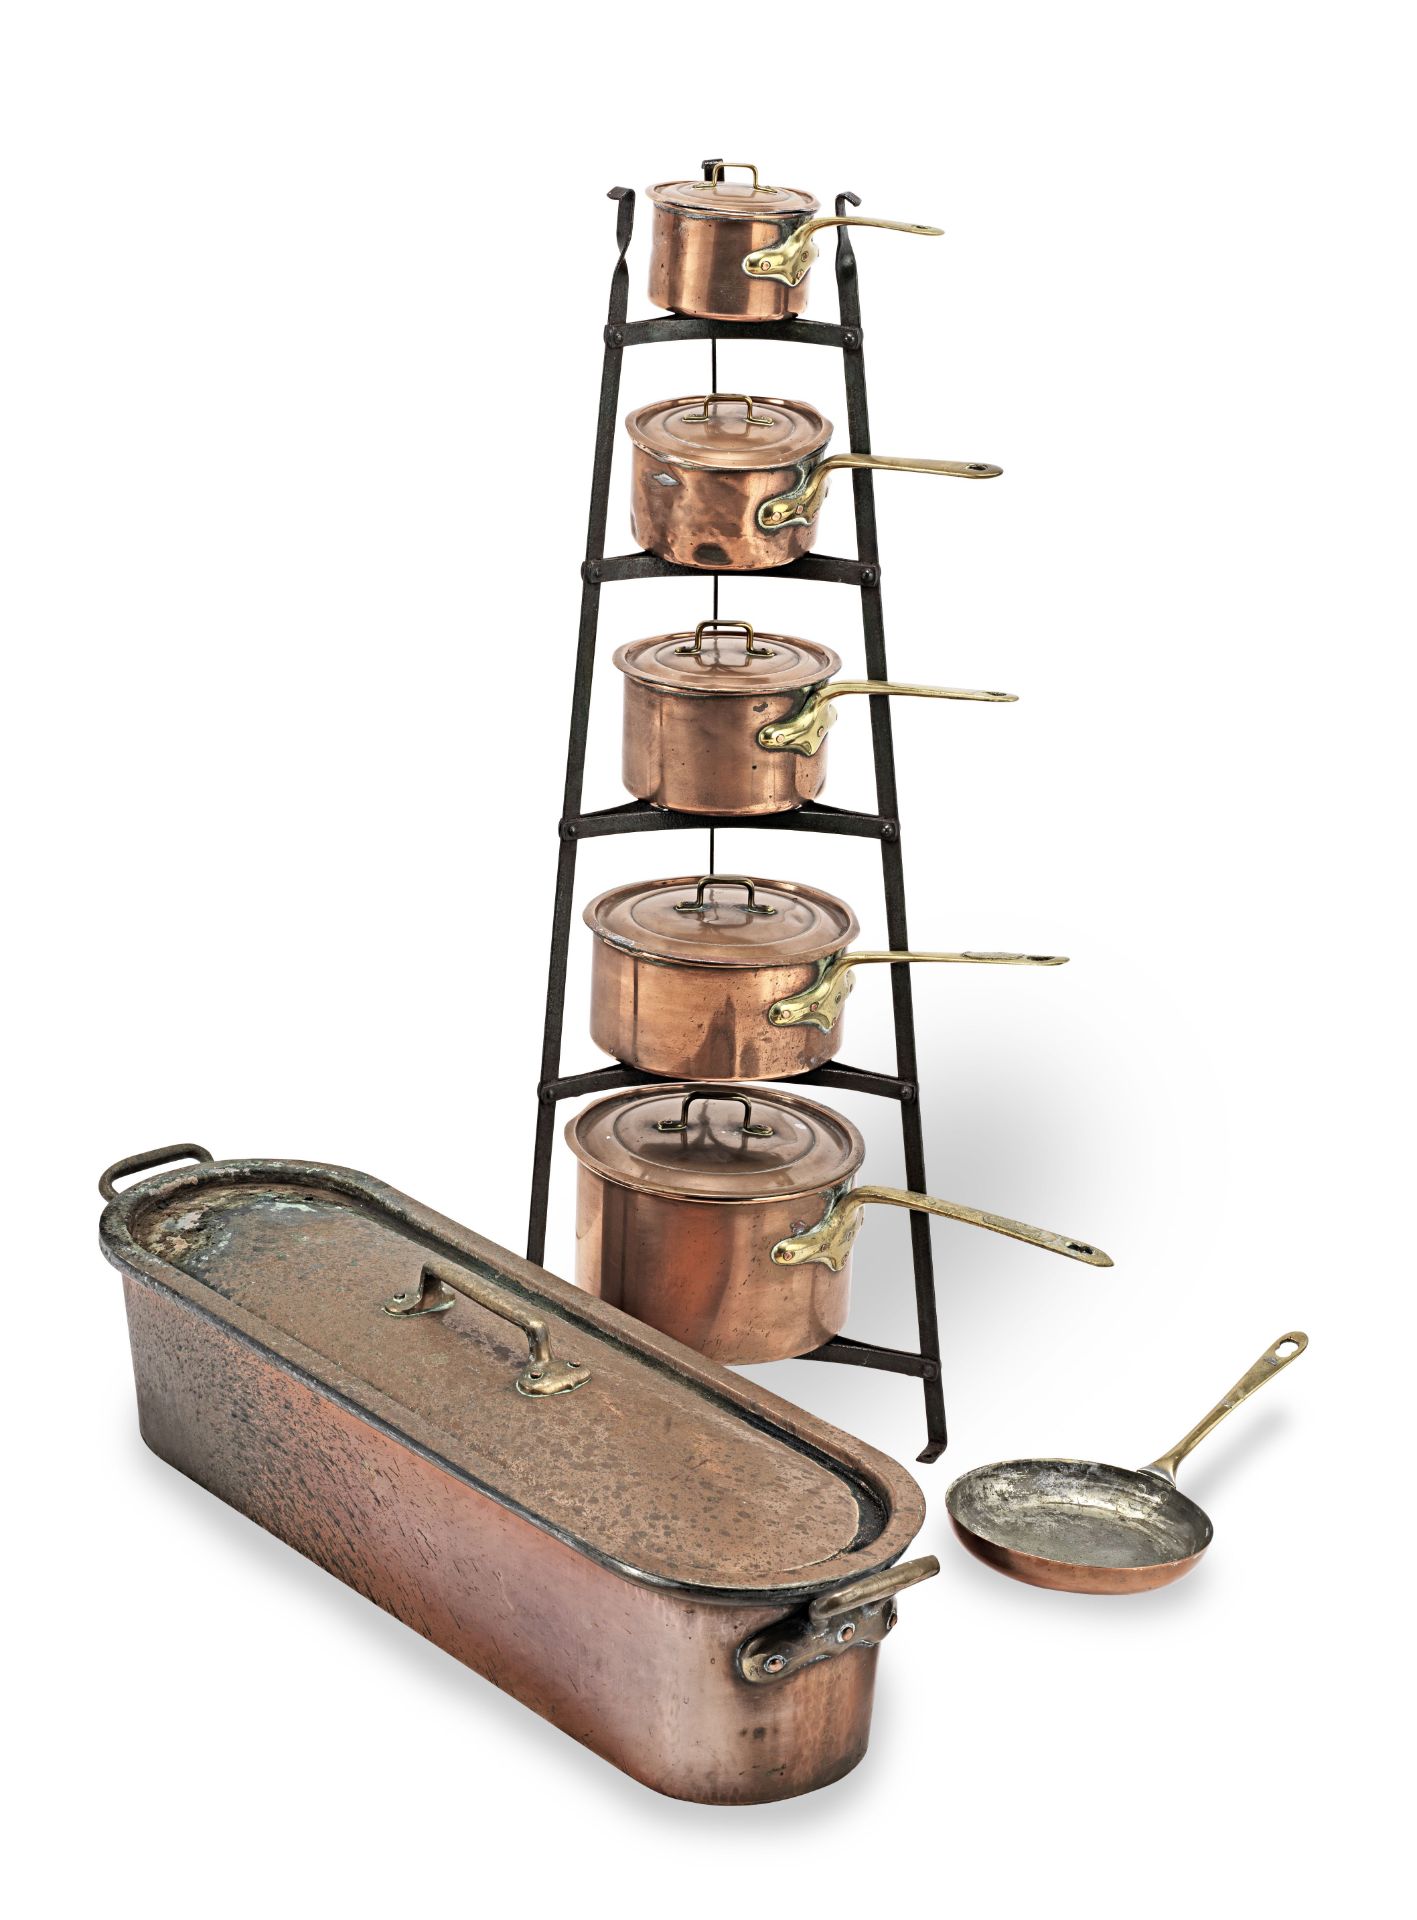 A collection of copper cooking utensils (14)